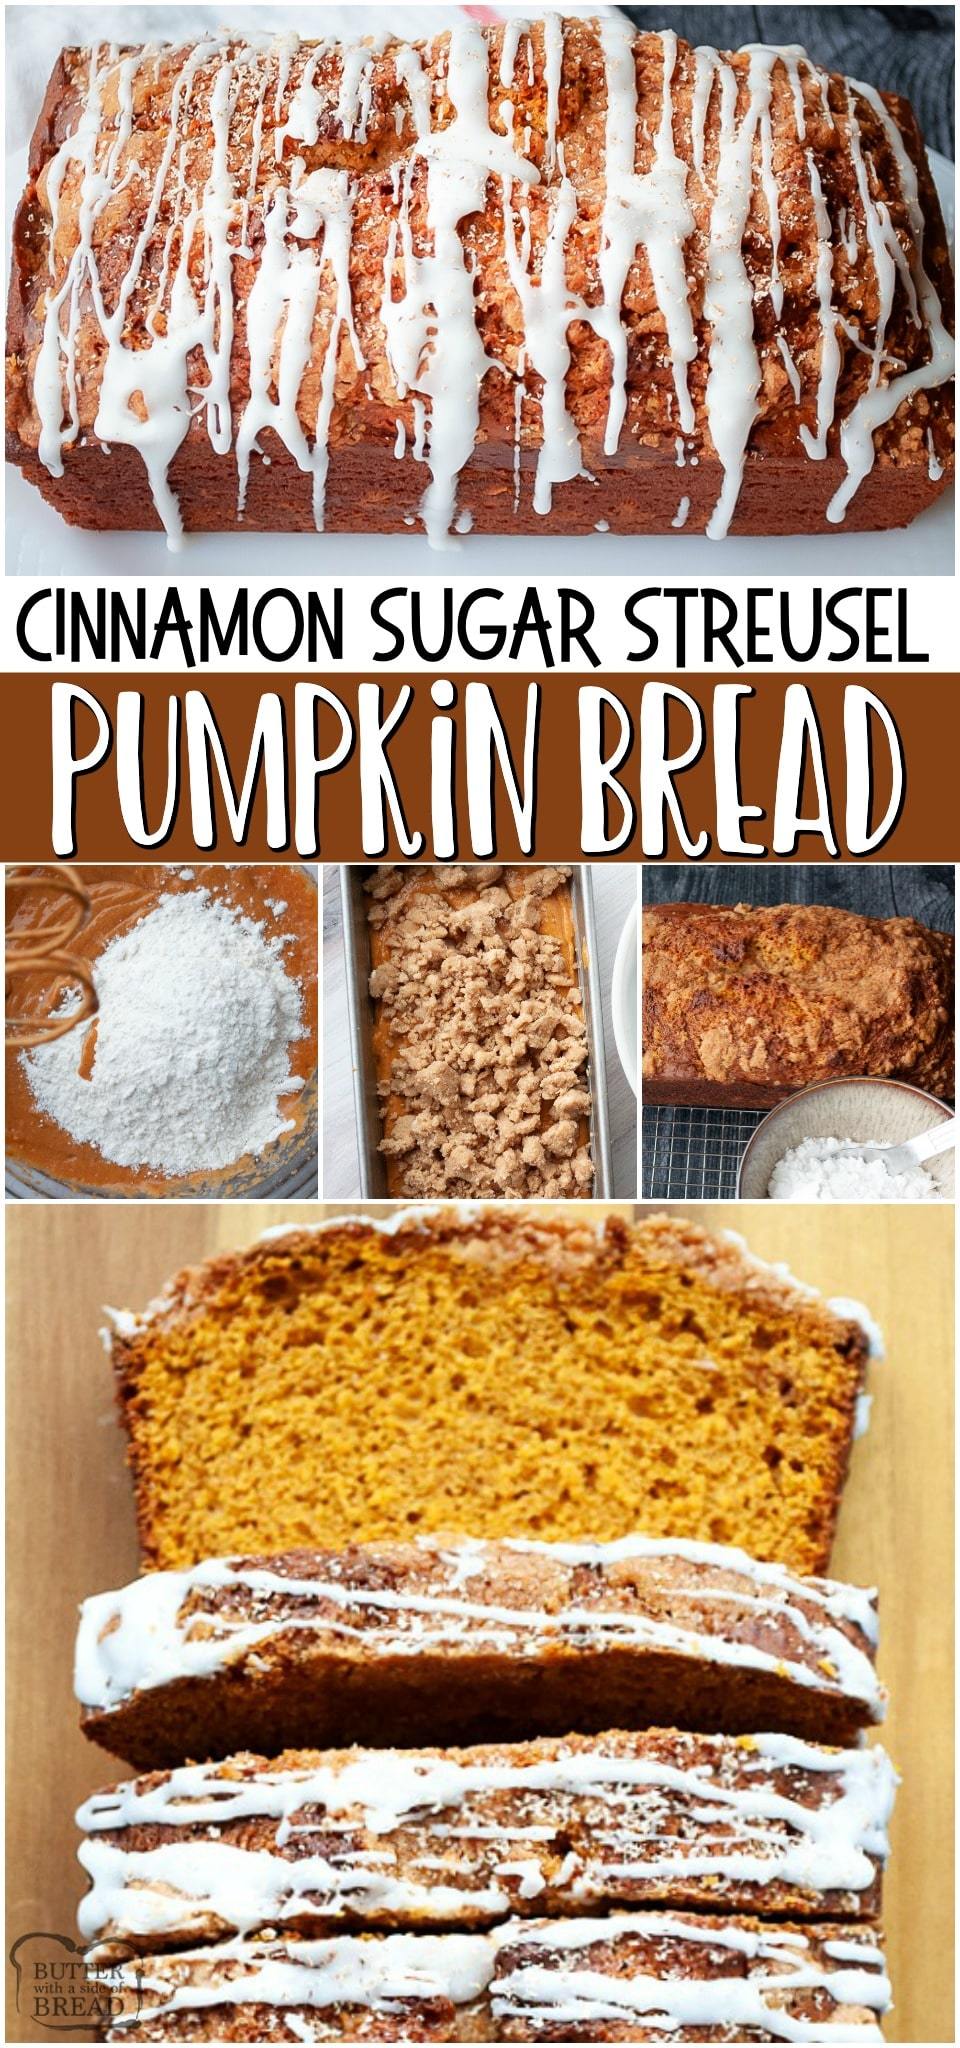 Pumpkin bread with streusel topping ~ classic pumpkin quick bread recipe made with pumpkin, brown sugar, spices & more. Moist pumpkin bread with cinnamon sugar topping and a simple glaze, this bread is a perfect snack or treat. #bread #pumpkin #cinnamon #baking #easyrecipe from BUTTER WITH A SIDE OF BREAD